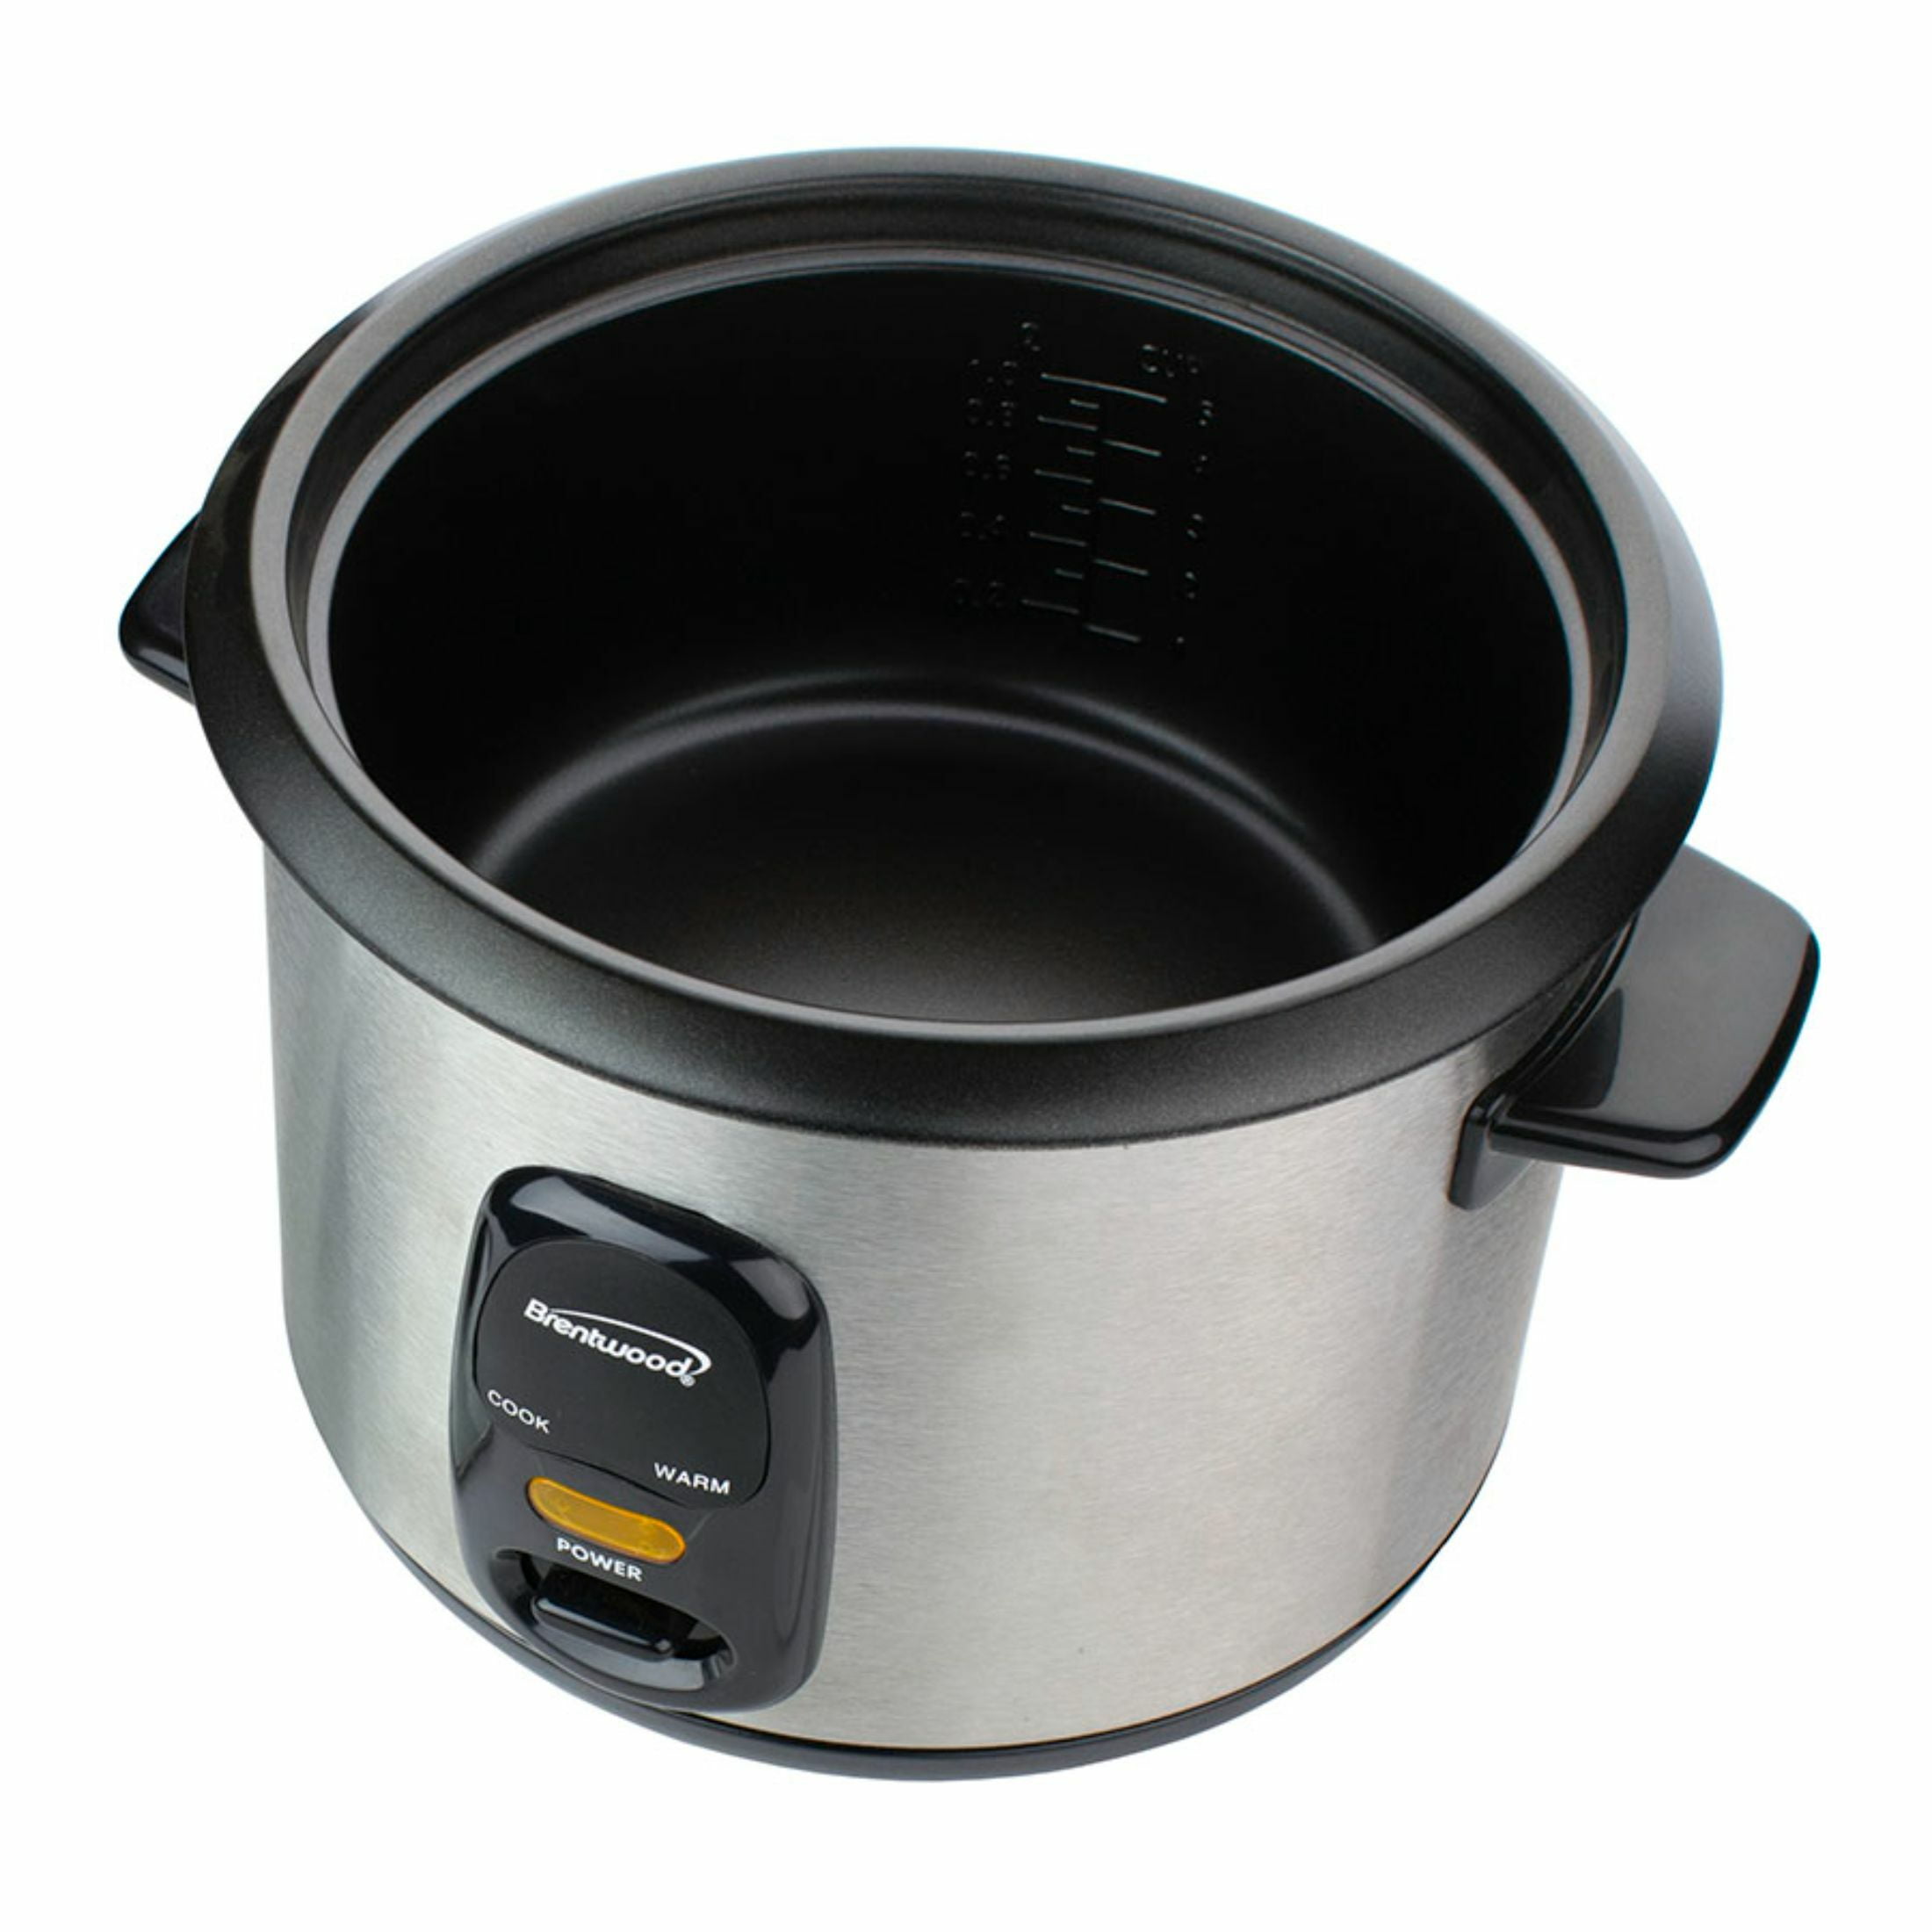 Brentwood 4 Cup Rice Cooker In Black : Target